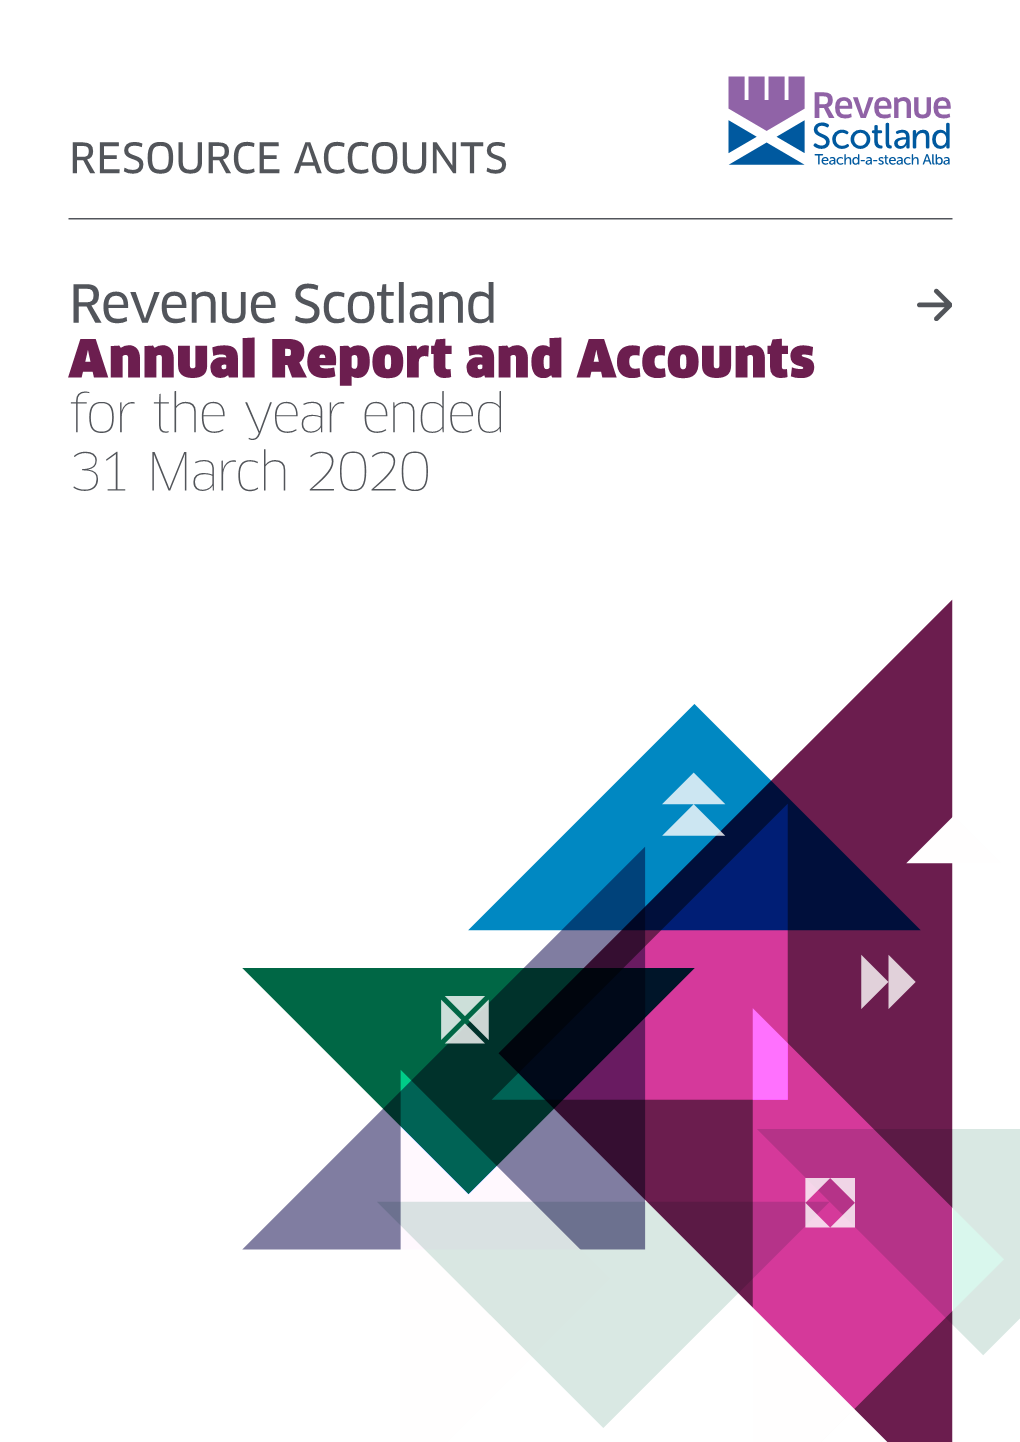 Revenue Scotland Annual Report and Accounts for the Year Ended 31 March 2020 Annual Report and Resource Accounts 2 Financial Statements